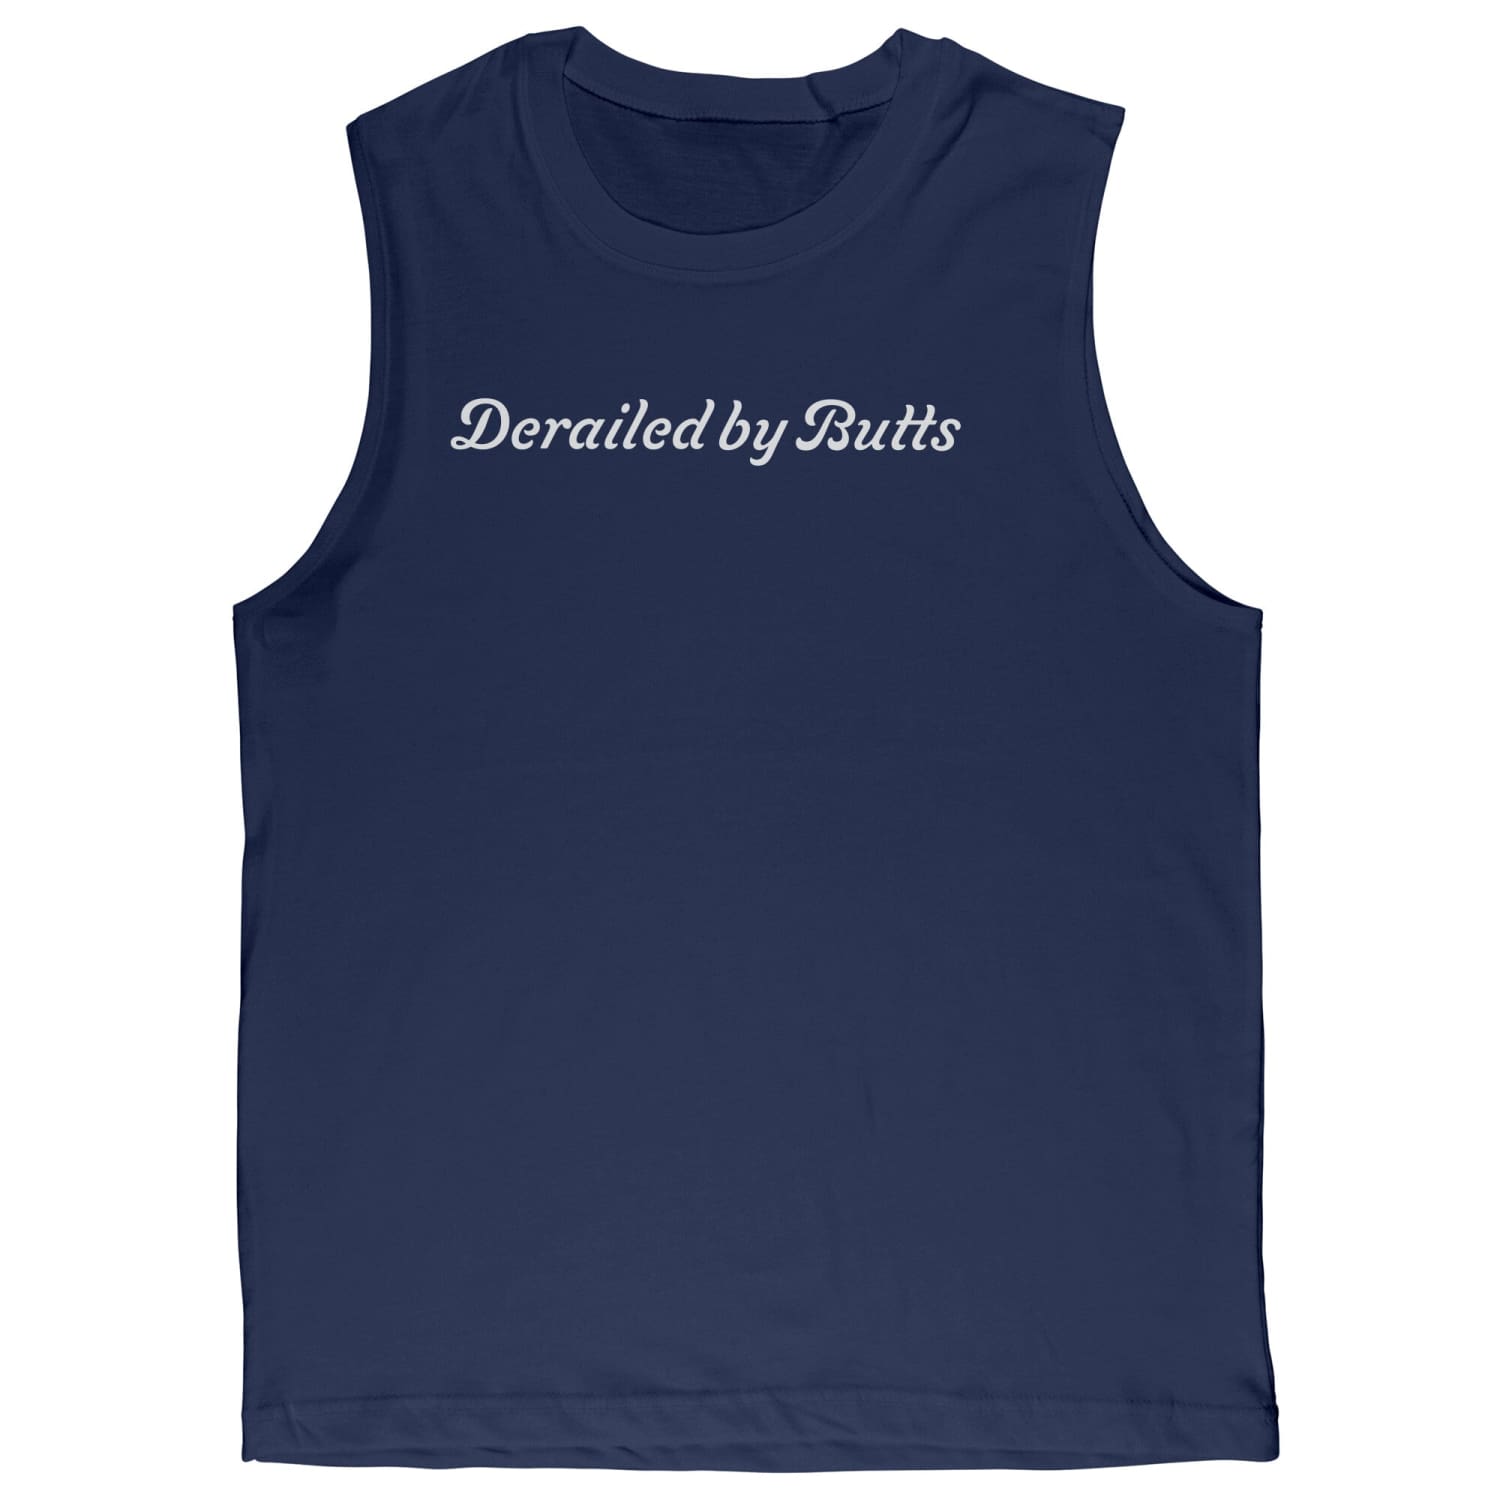 Derailed By Butts Sleeveless Muscle Tee - Navy / S - Apparel